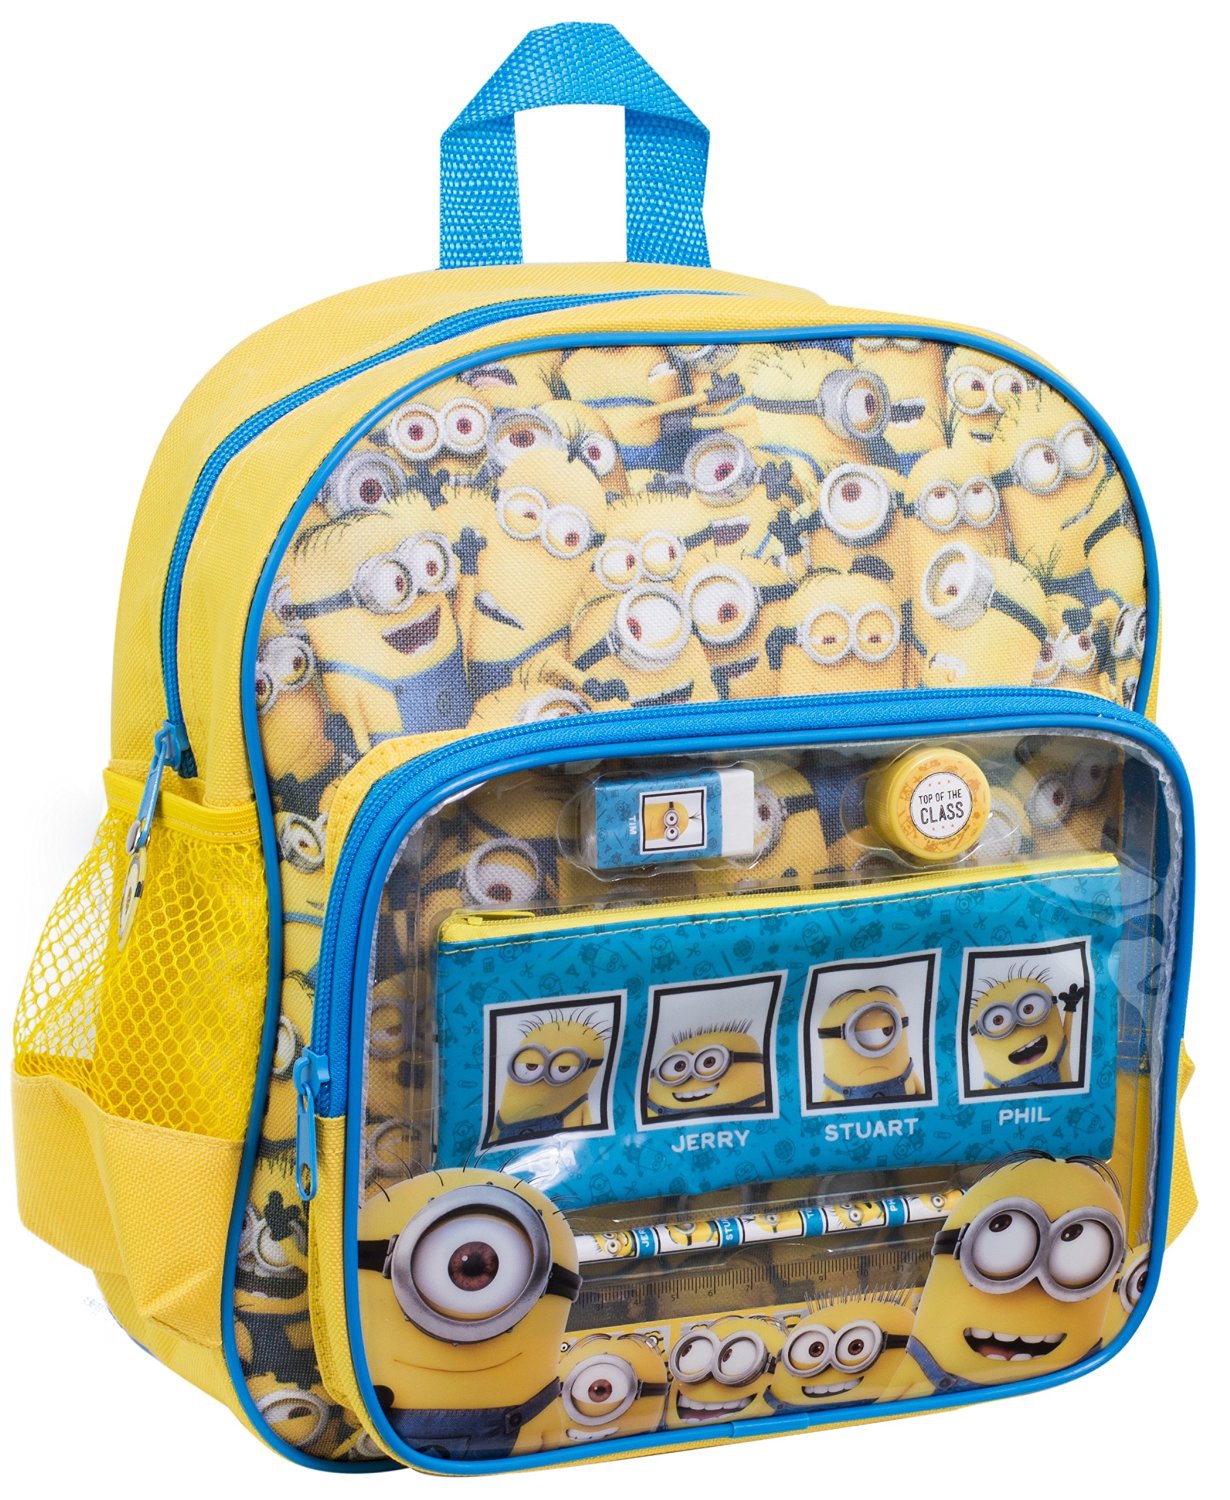 Despicable Me Minions 'with Stationery' School Bag Rucksack Backpack